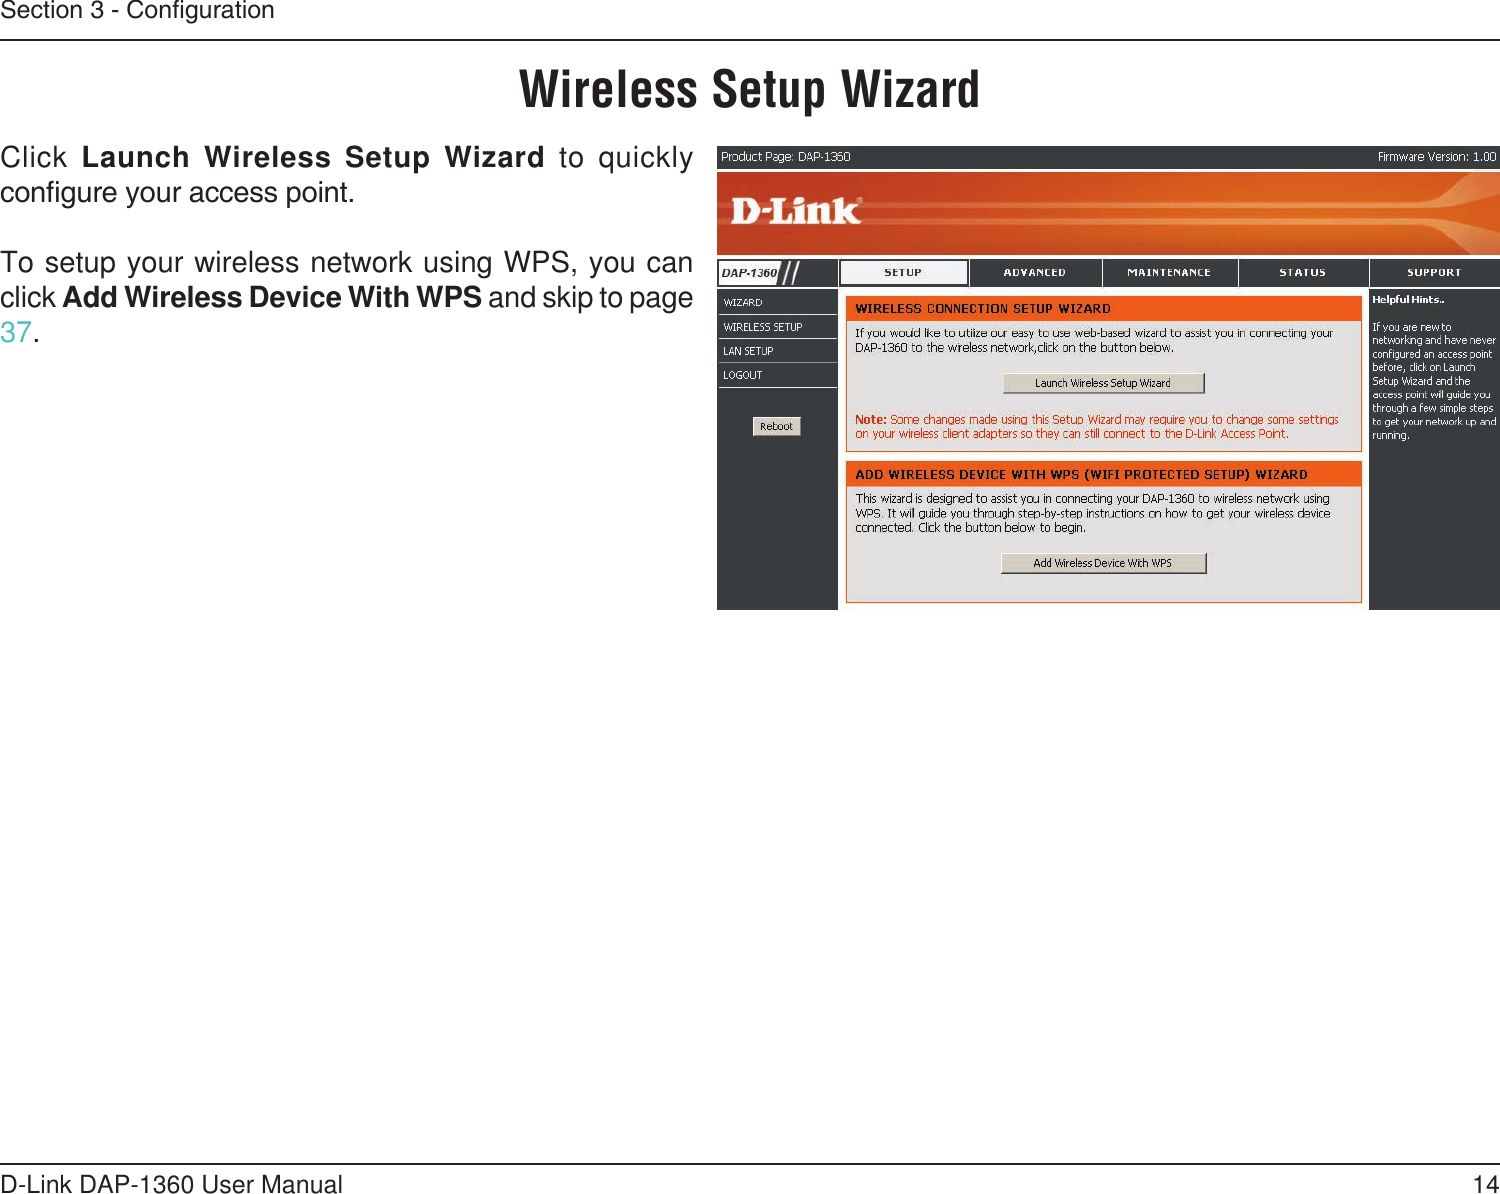 14D-Link DAP-1360 User ManualSection 3 - CongurationClick Launch Wireless Setup Wizard  to quickly congure your access point.To setup your wireless network using WPS, you can click Add Wireless Device With WPS and skip to page 37.Wireless Setup Wizard 